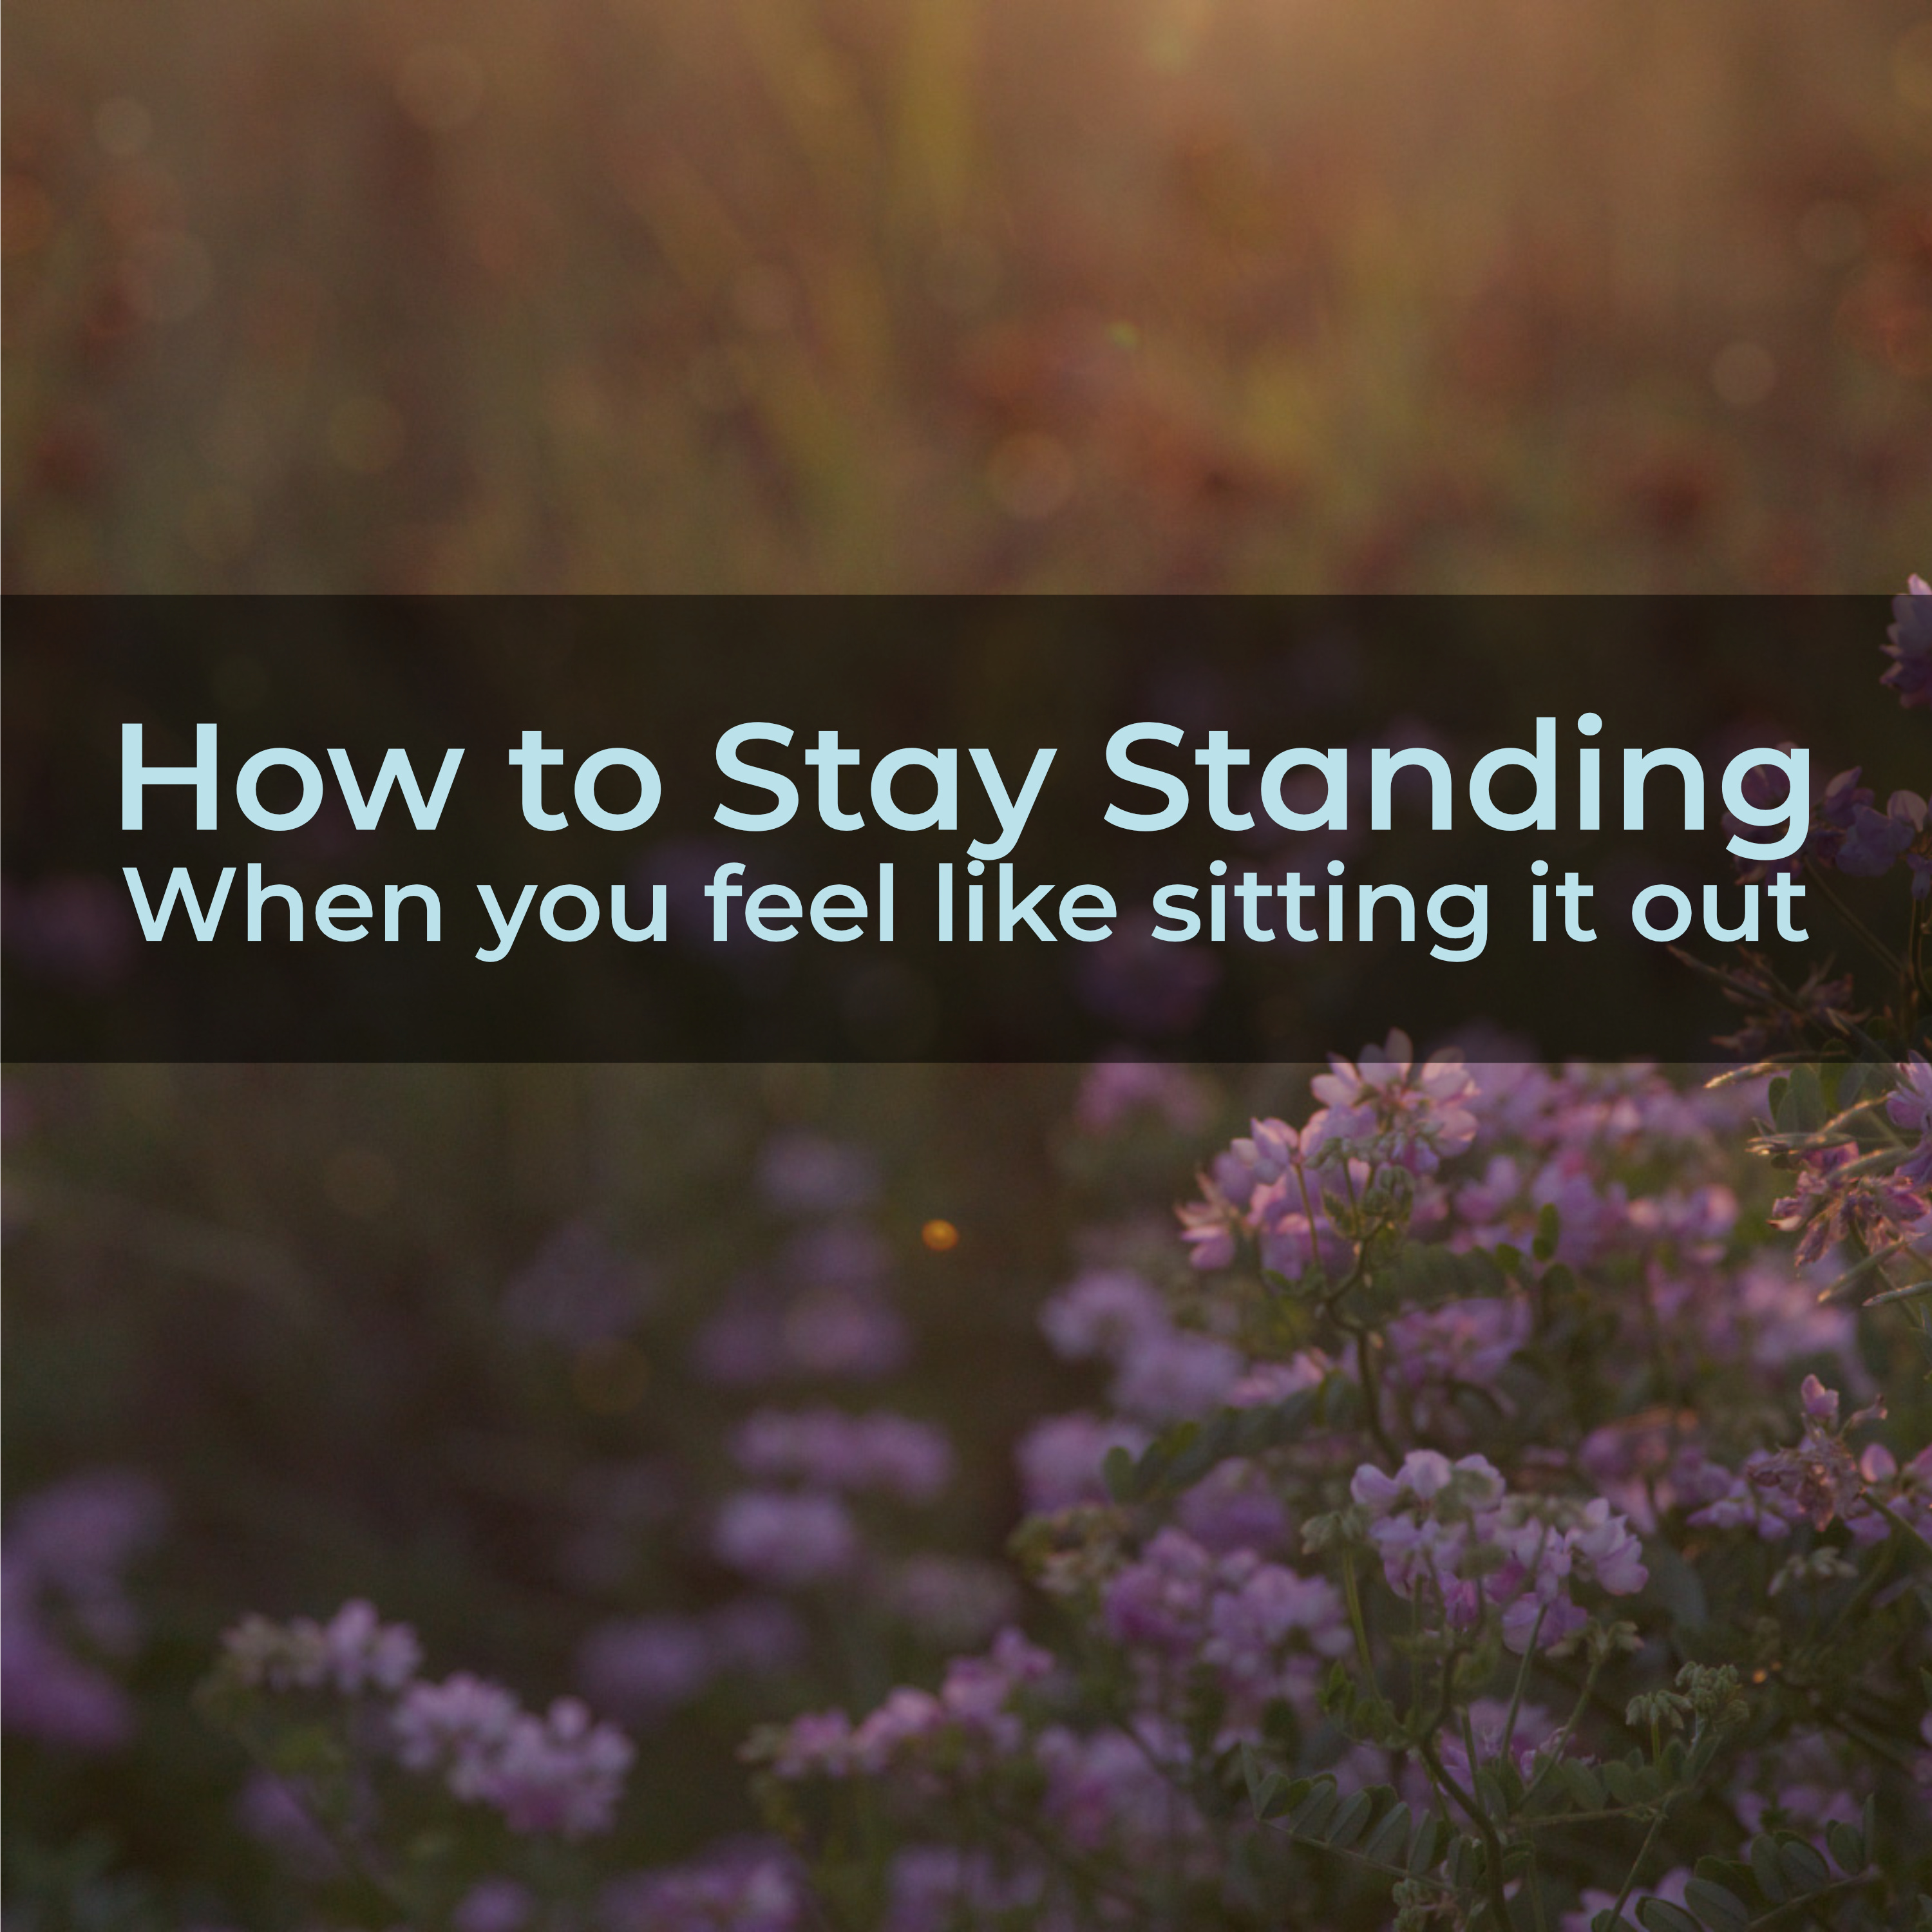 How to Stay Standing When You Feel Like Sitting It Out